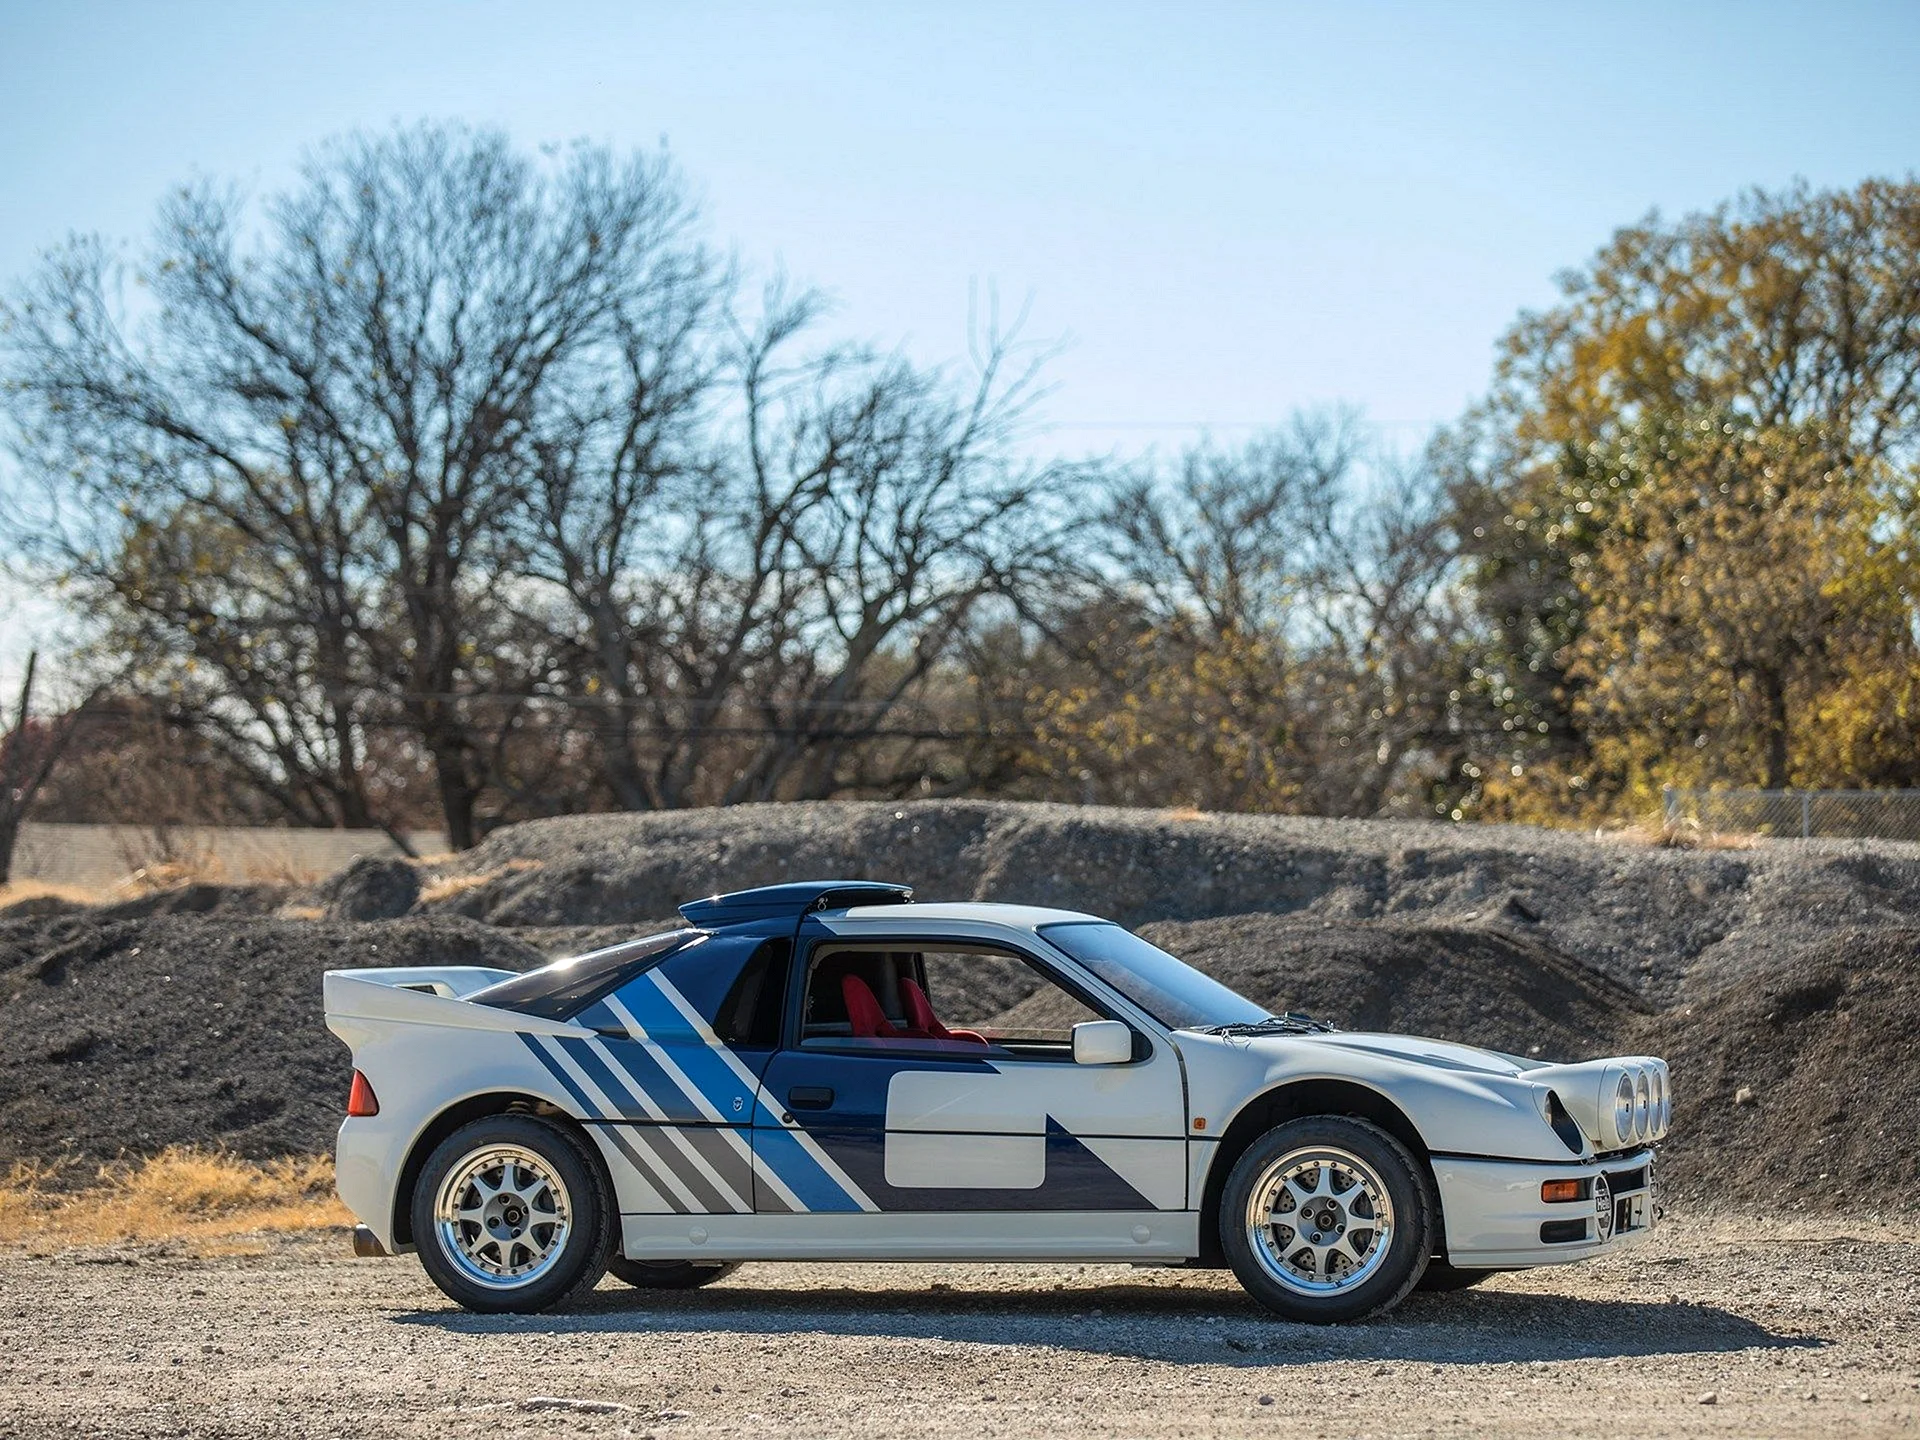 Ford Rs200 Evo Wallpaper